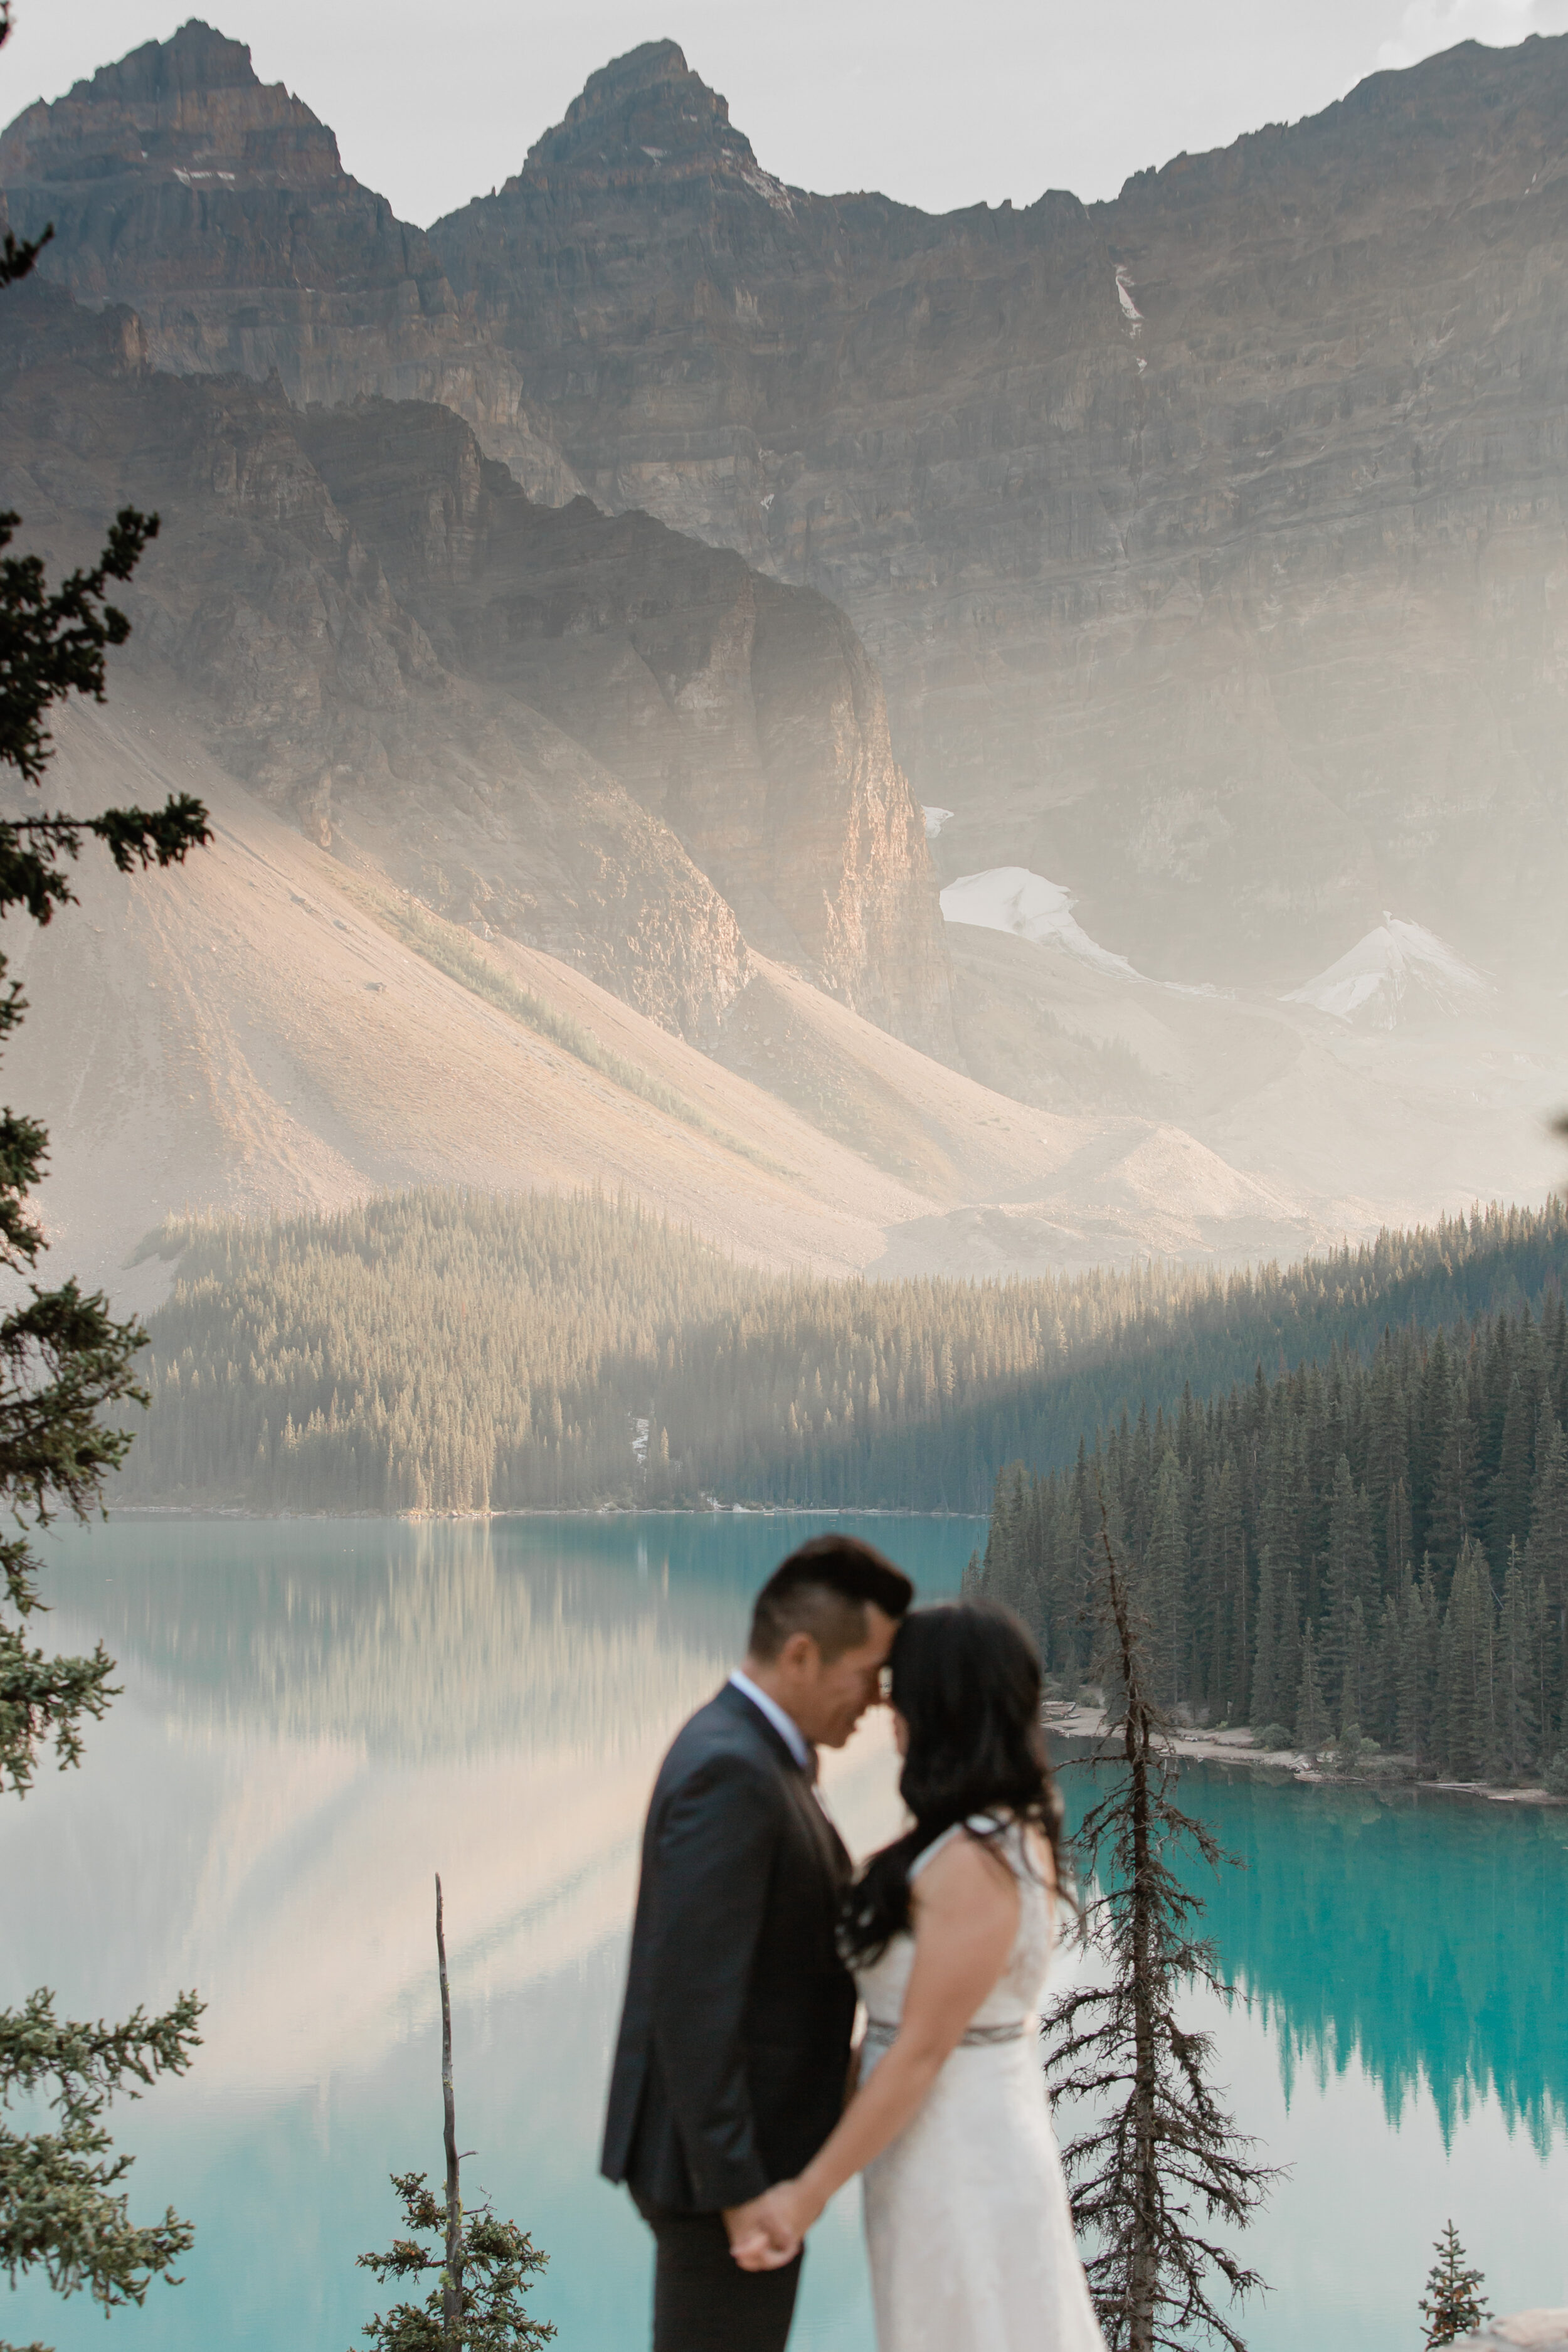 A couple leans in for a kiss while on an overlook in Banff National Park.